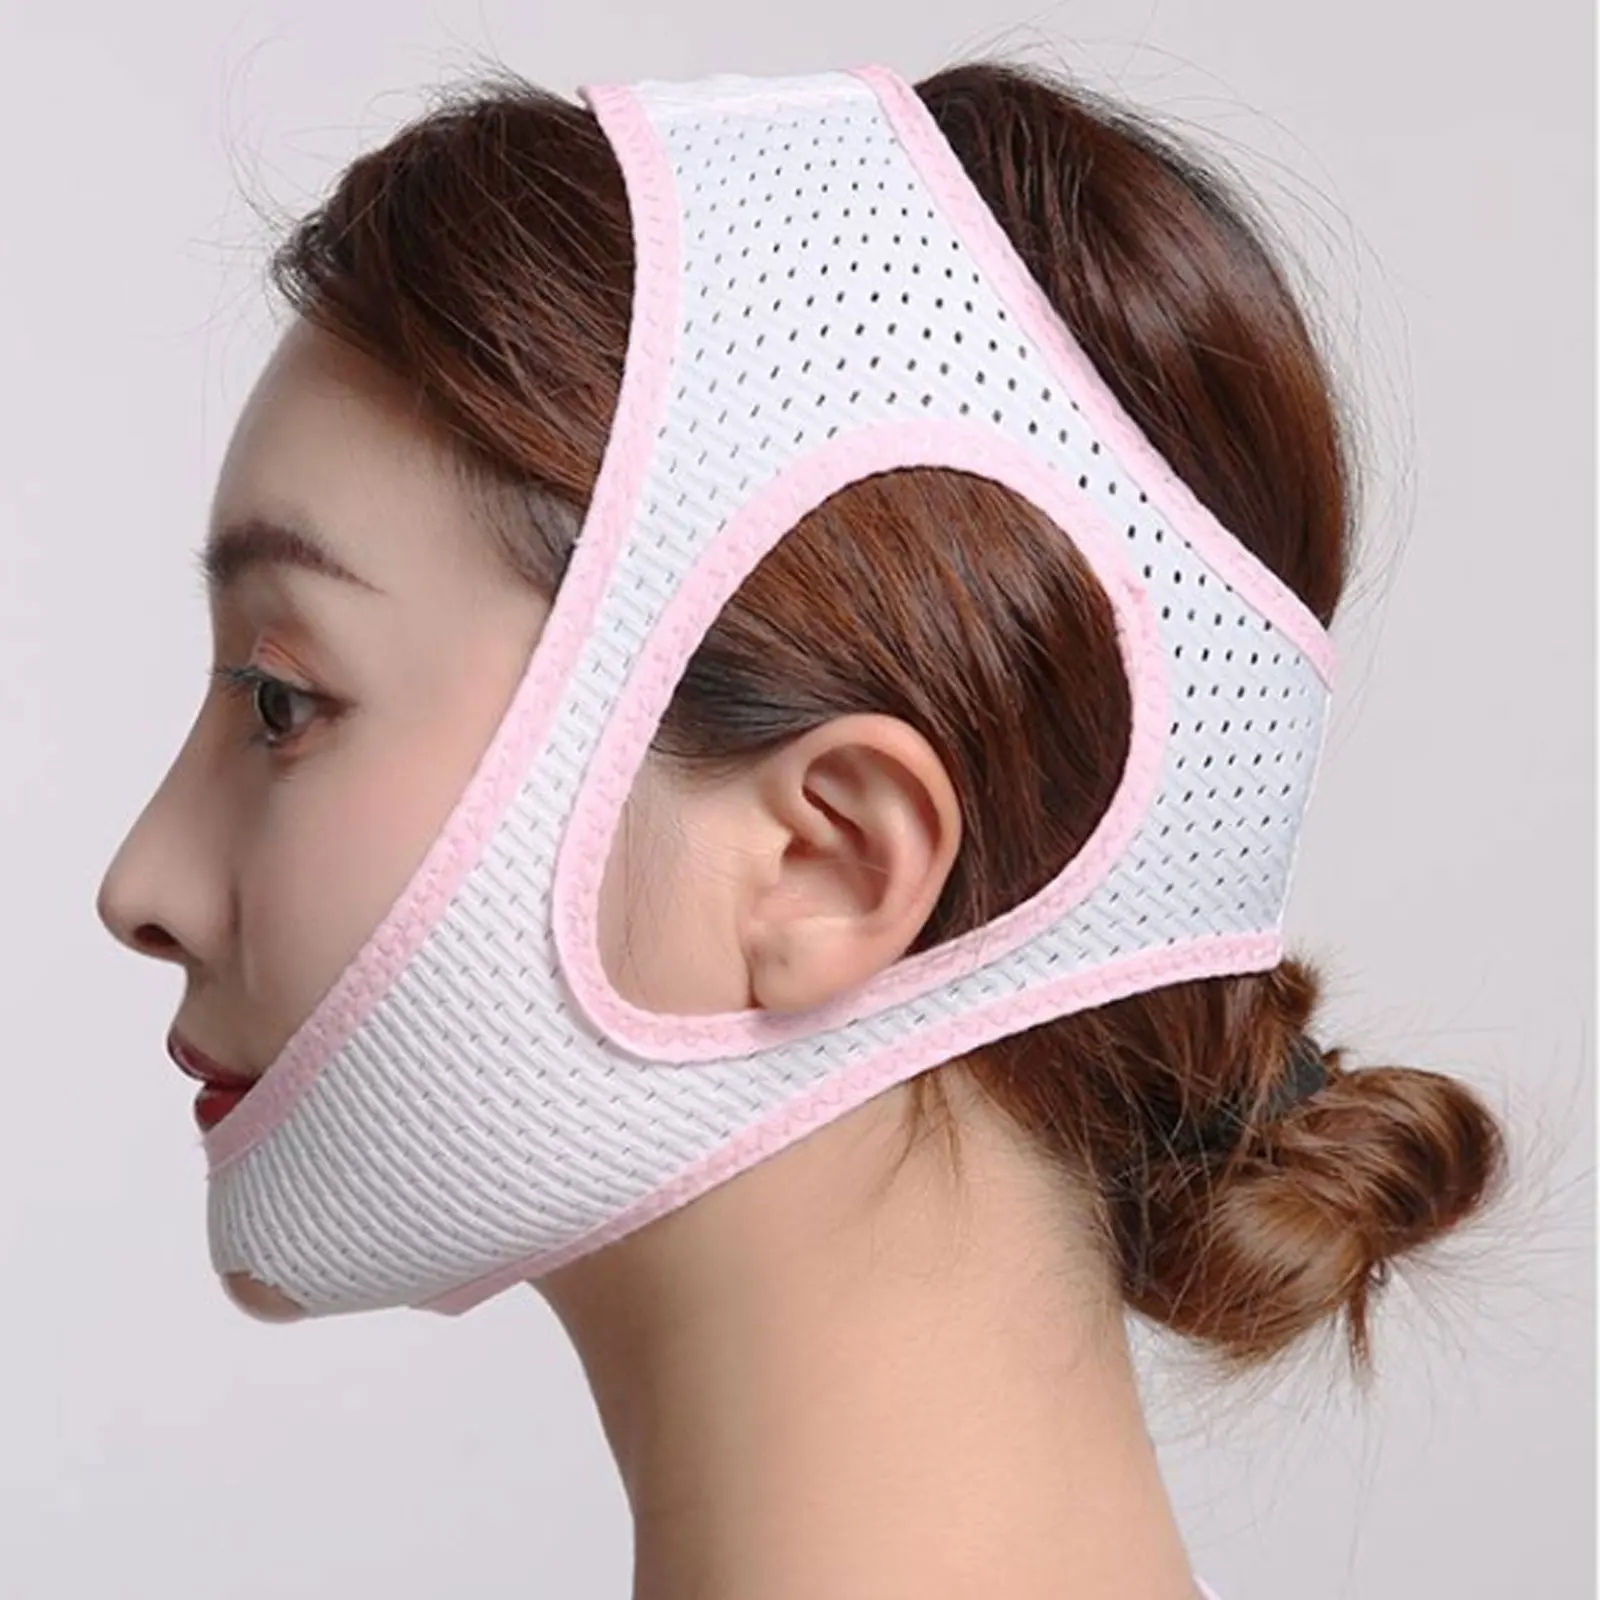 

Anti Snoring Chin Strap Best Stop Snoring Device, Adjustable Snore Reduction Belt Sleep Aids Chin Strips Belt for Unisex